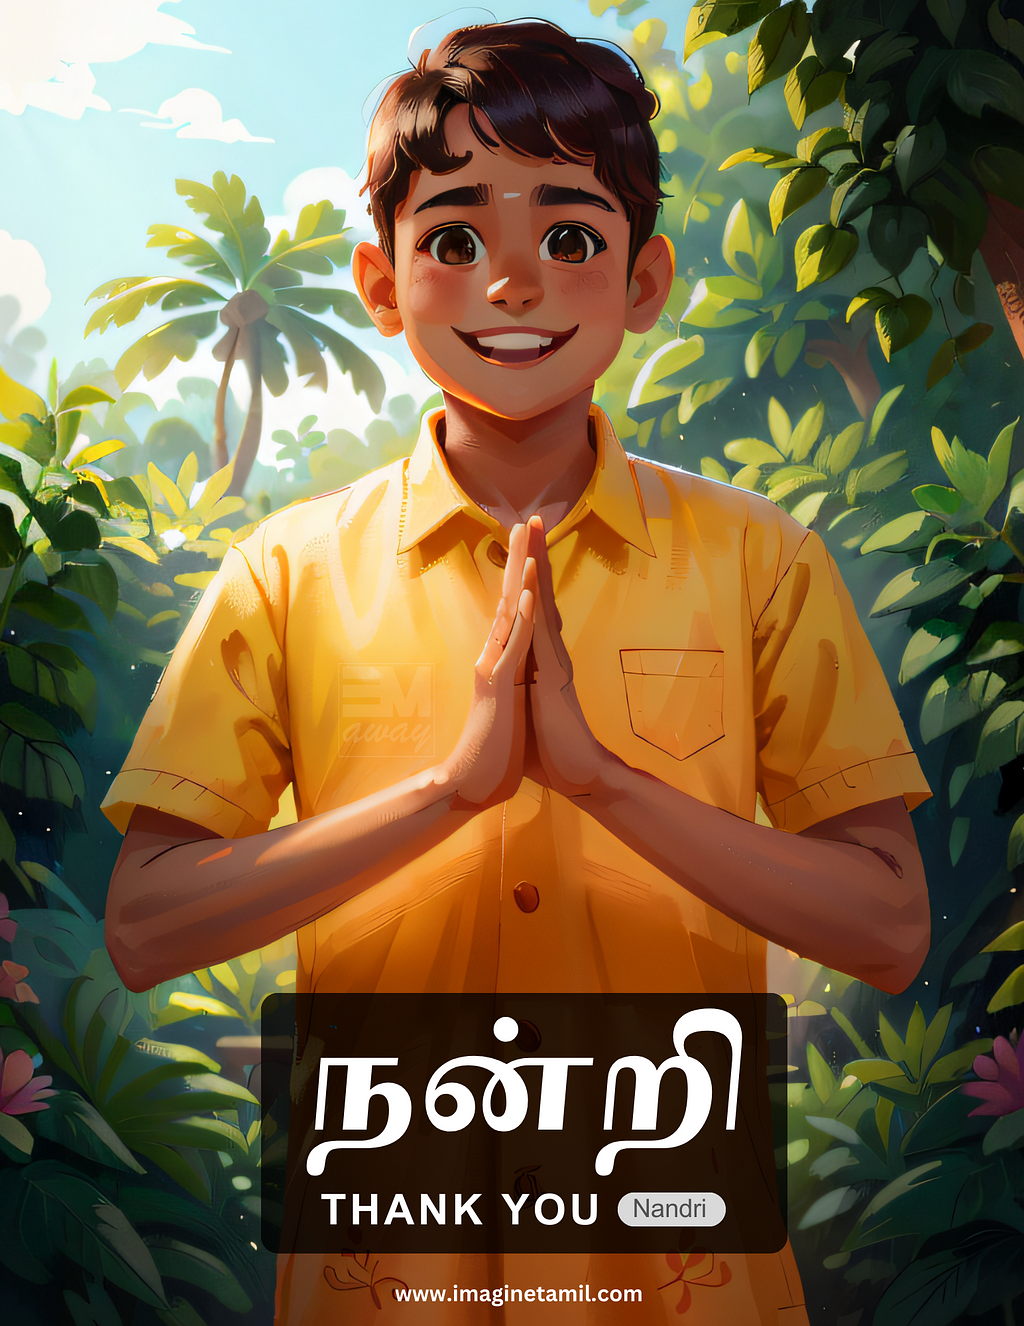 An illustration of a Tamil boy saying vanakkam (welcome) with hands together